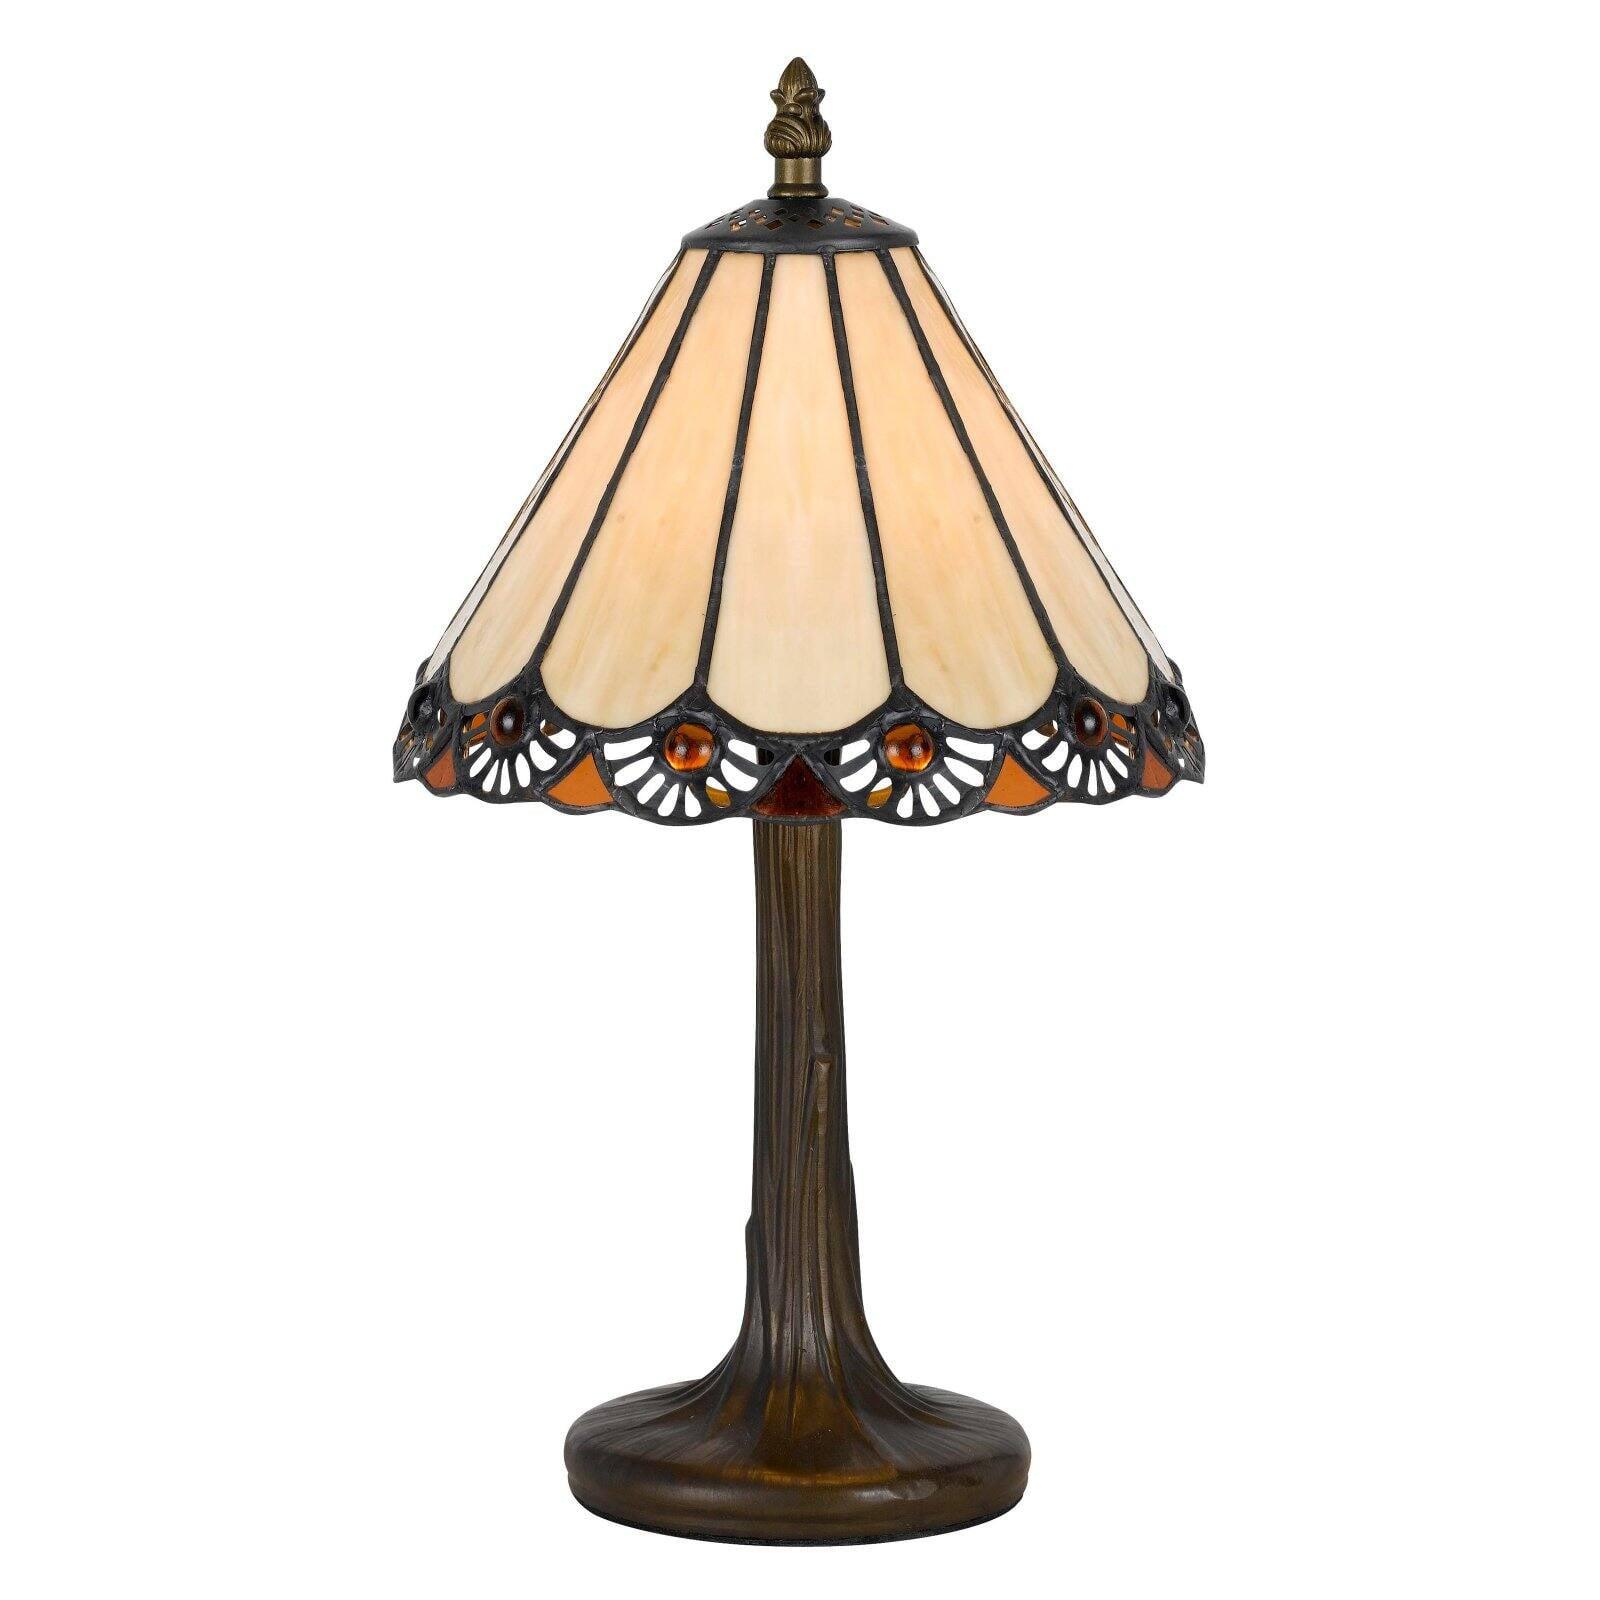 Tiffany-Inspired Bronze Desk Lamp with Stained Glass Shade